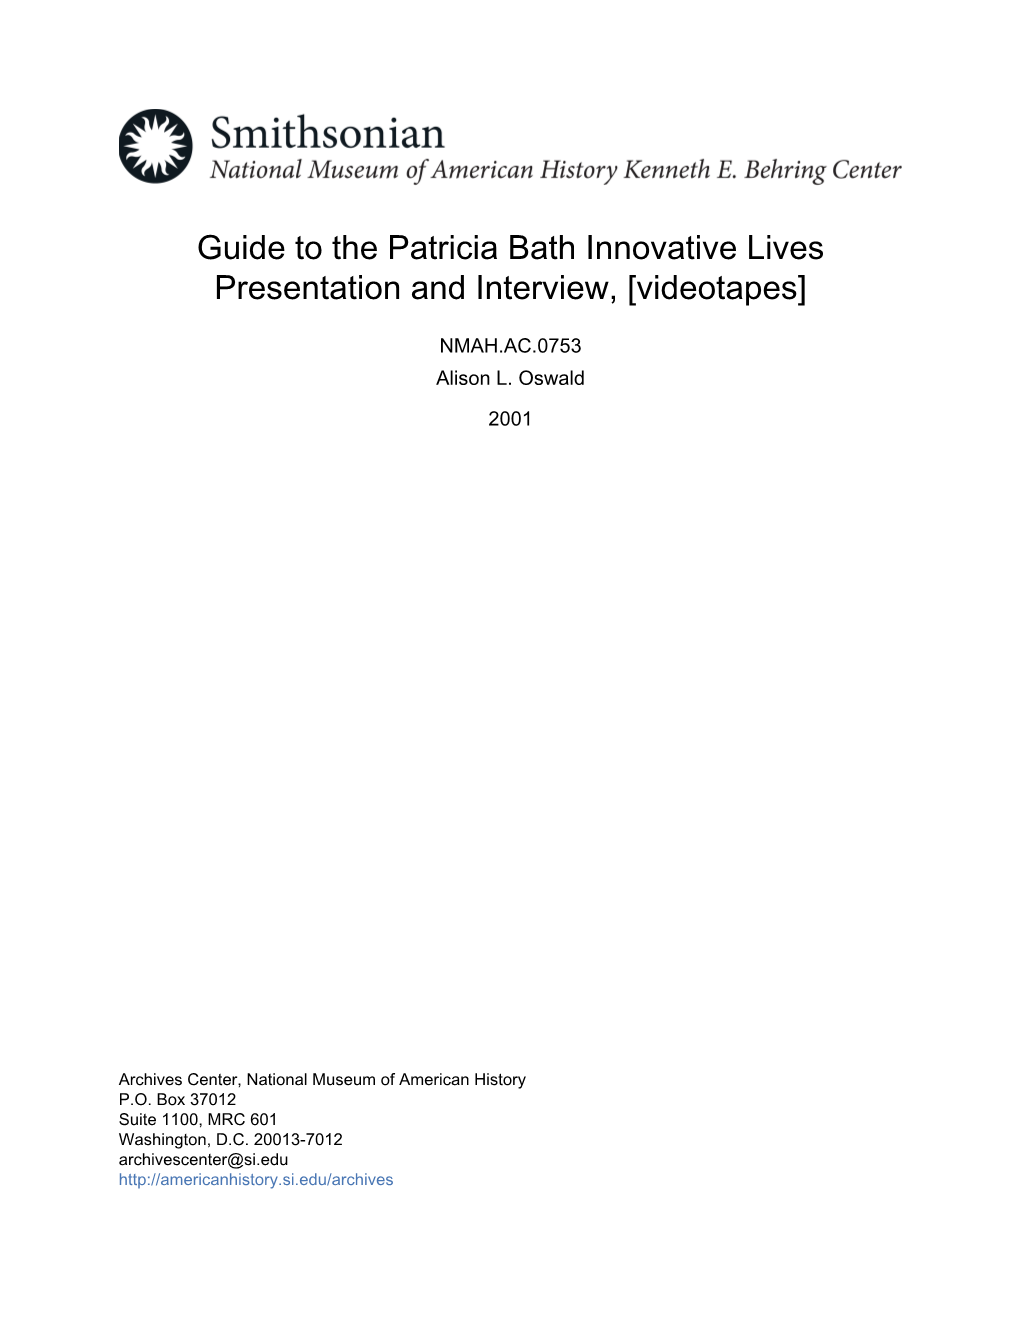 Guide to the Patricia Bath Innovative Lives Presentation and Interview, [Videotapes]